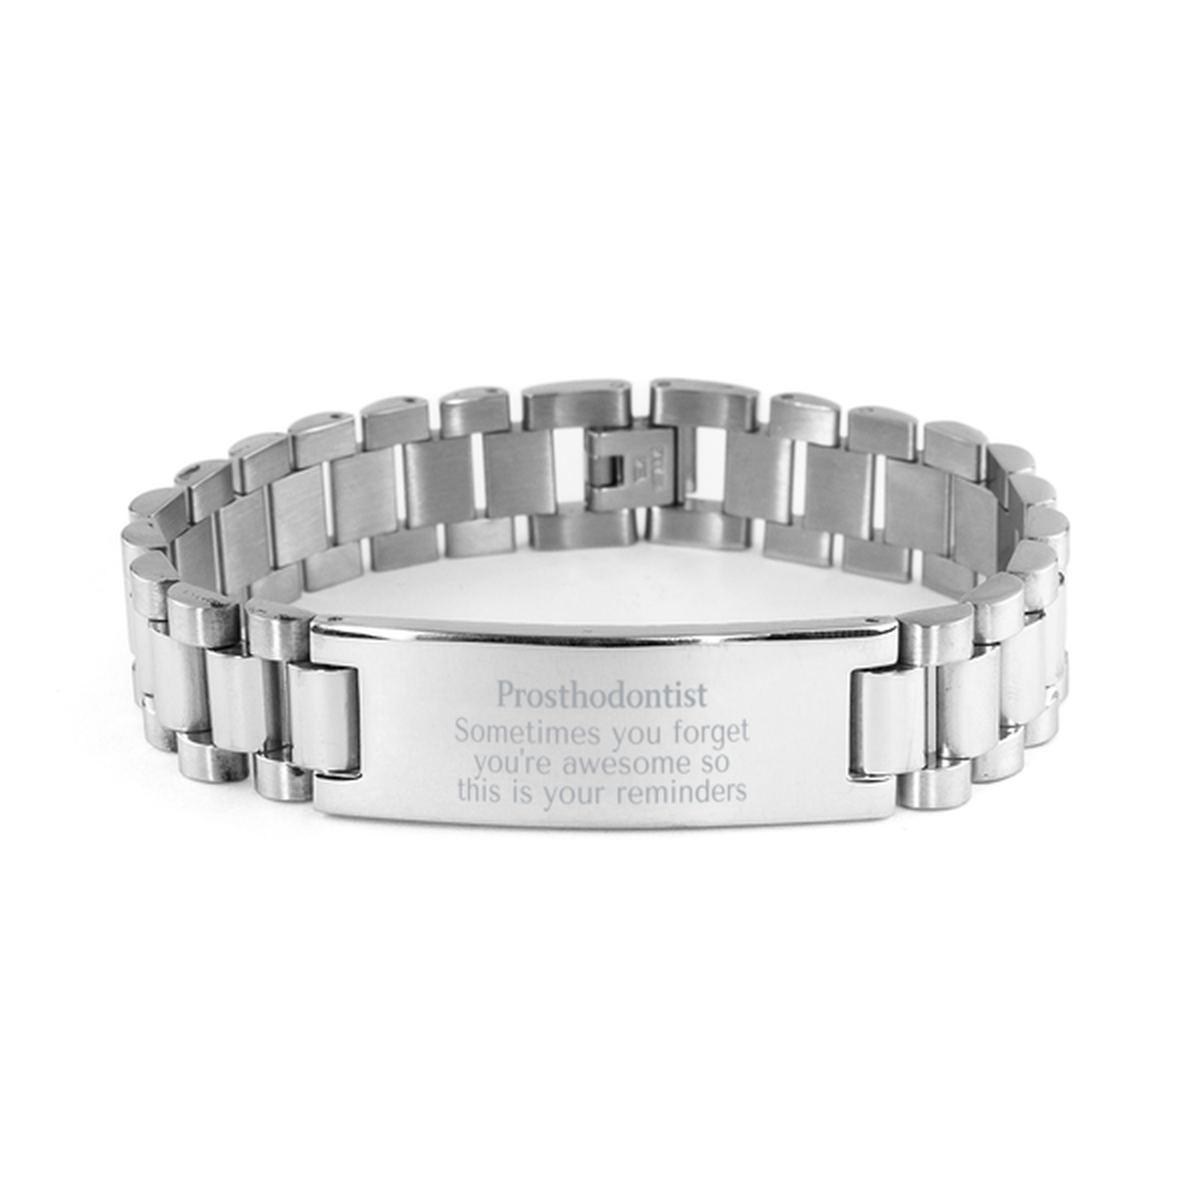 Sentimental Prosthodontist Ladder Stainless Steel Bracelet, Prosthodontist Sometimes you forget you're awesome so this is your reminders, Graduation Christmas Birthday Gifts for Prosthodontist, Men, Women, Coworkers